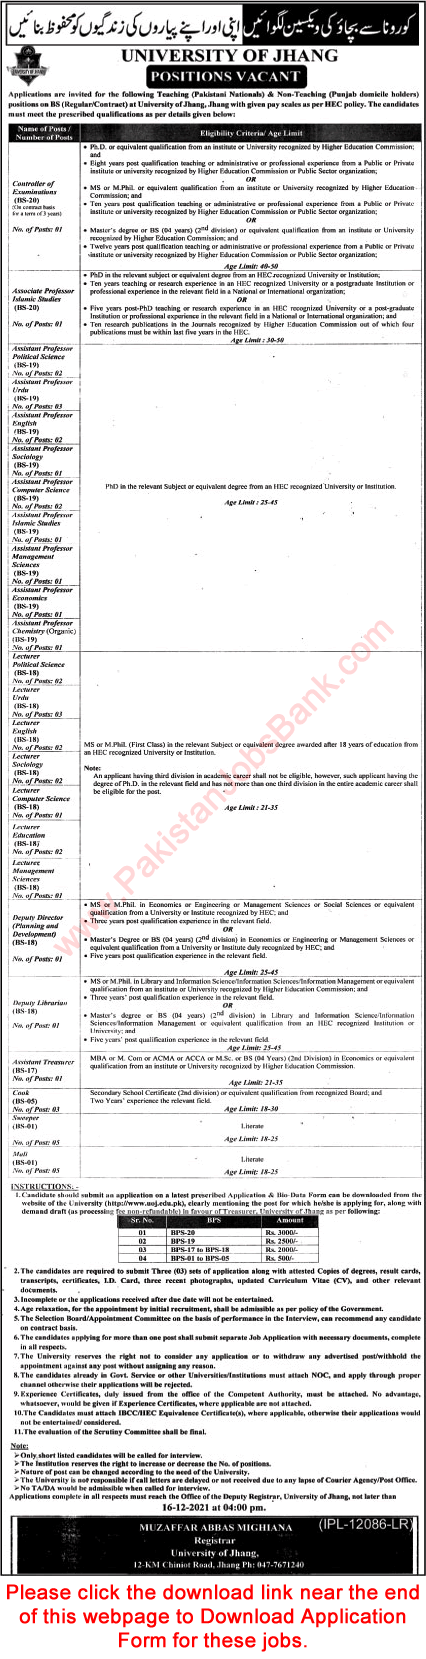 University of Jhang Jobs November 2021 Application Form Teaching Faculty & Others Latest